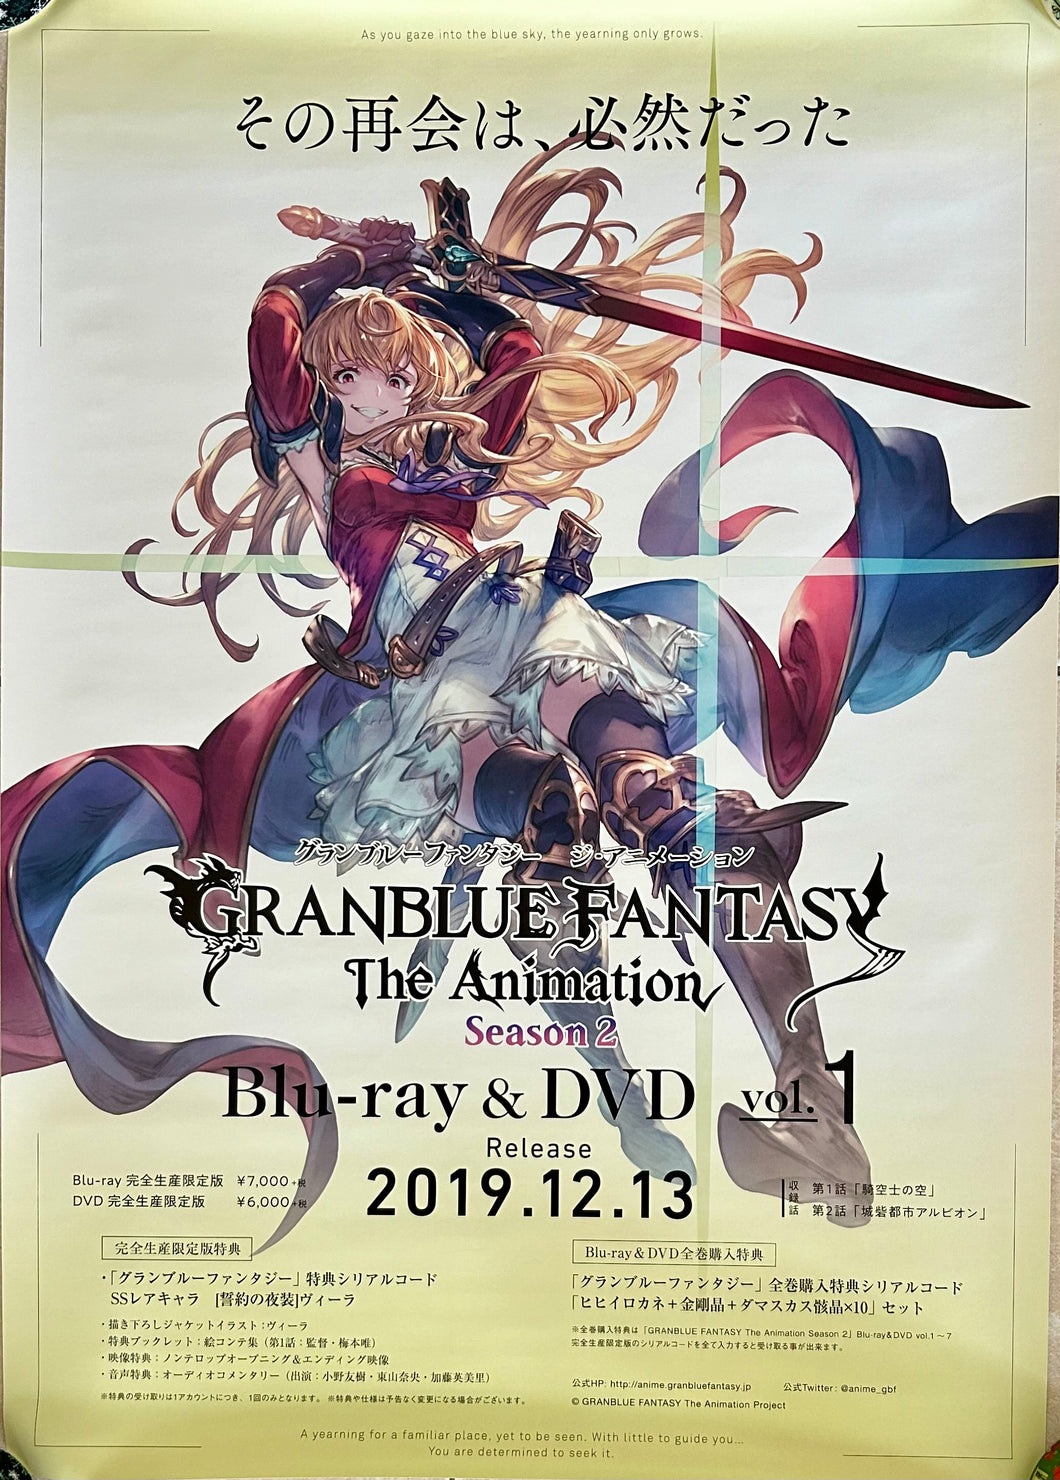 GRANBLUE FANTASY The Animation - Promotional B2 Poster - Blu-ray/DVD Vol.1